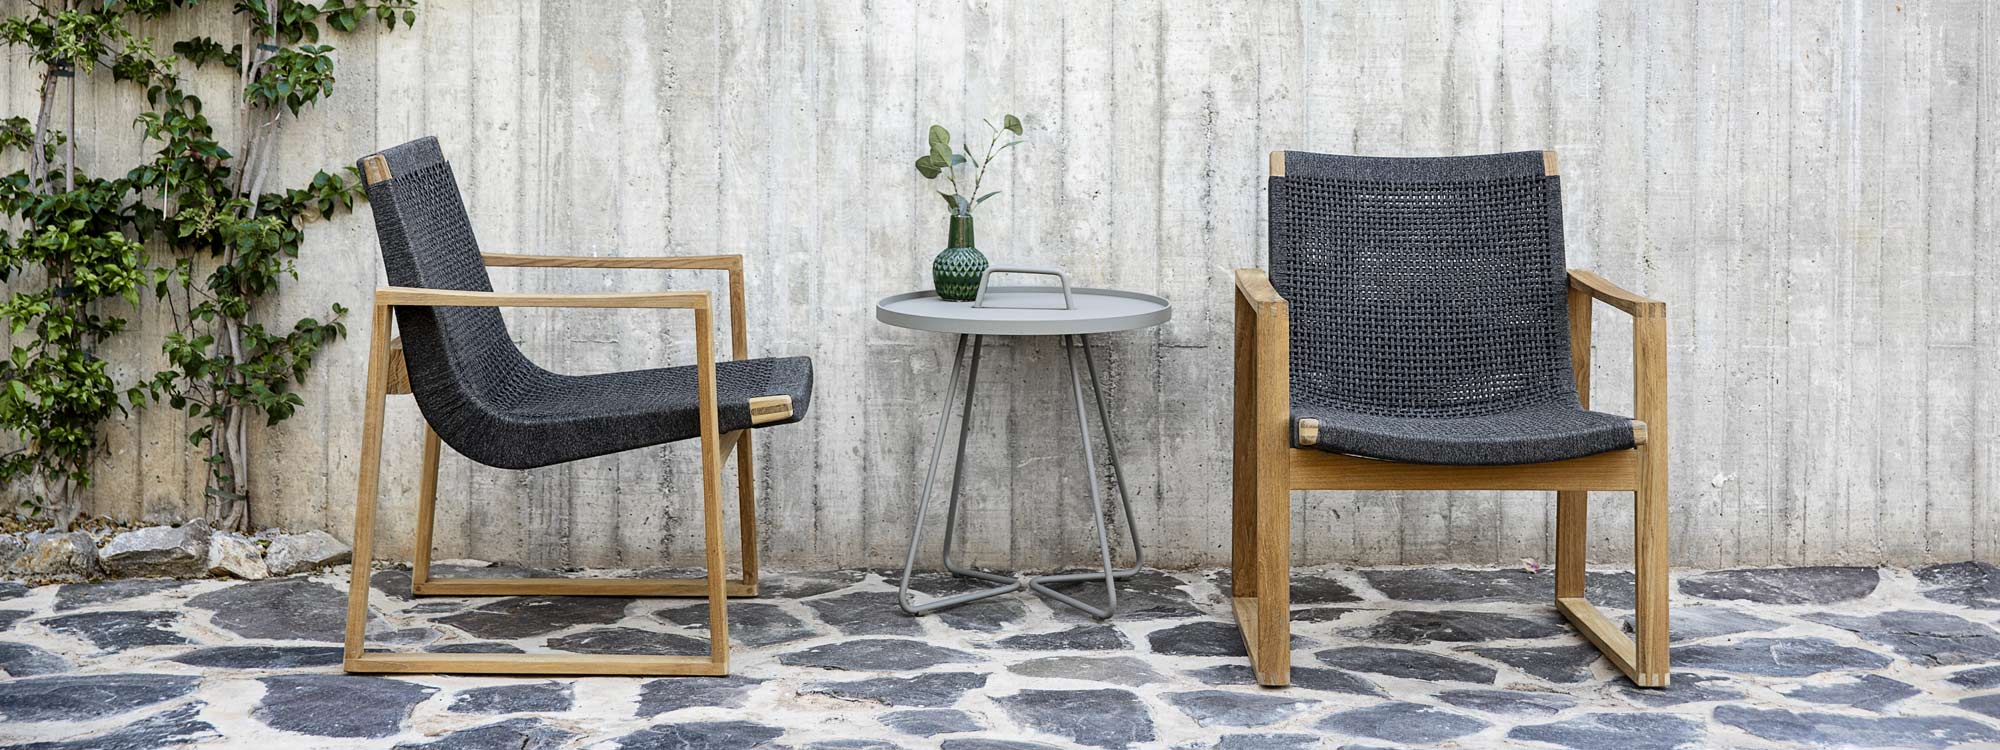 Image of pair of Cane-line Endless lounge chairs and taupe On The Move tray table on stone terrace against concrete wall with shutter boarding indentations